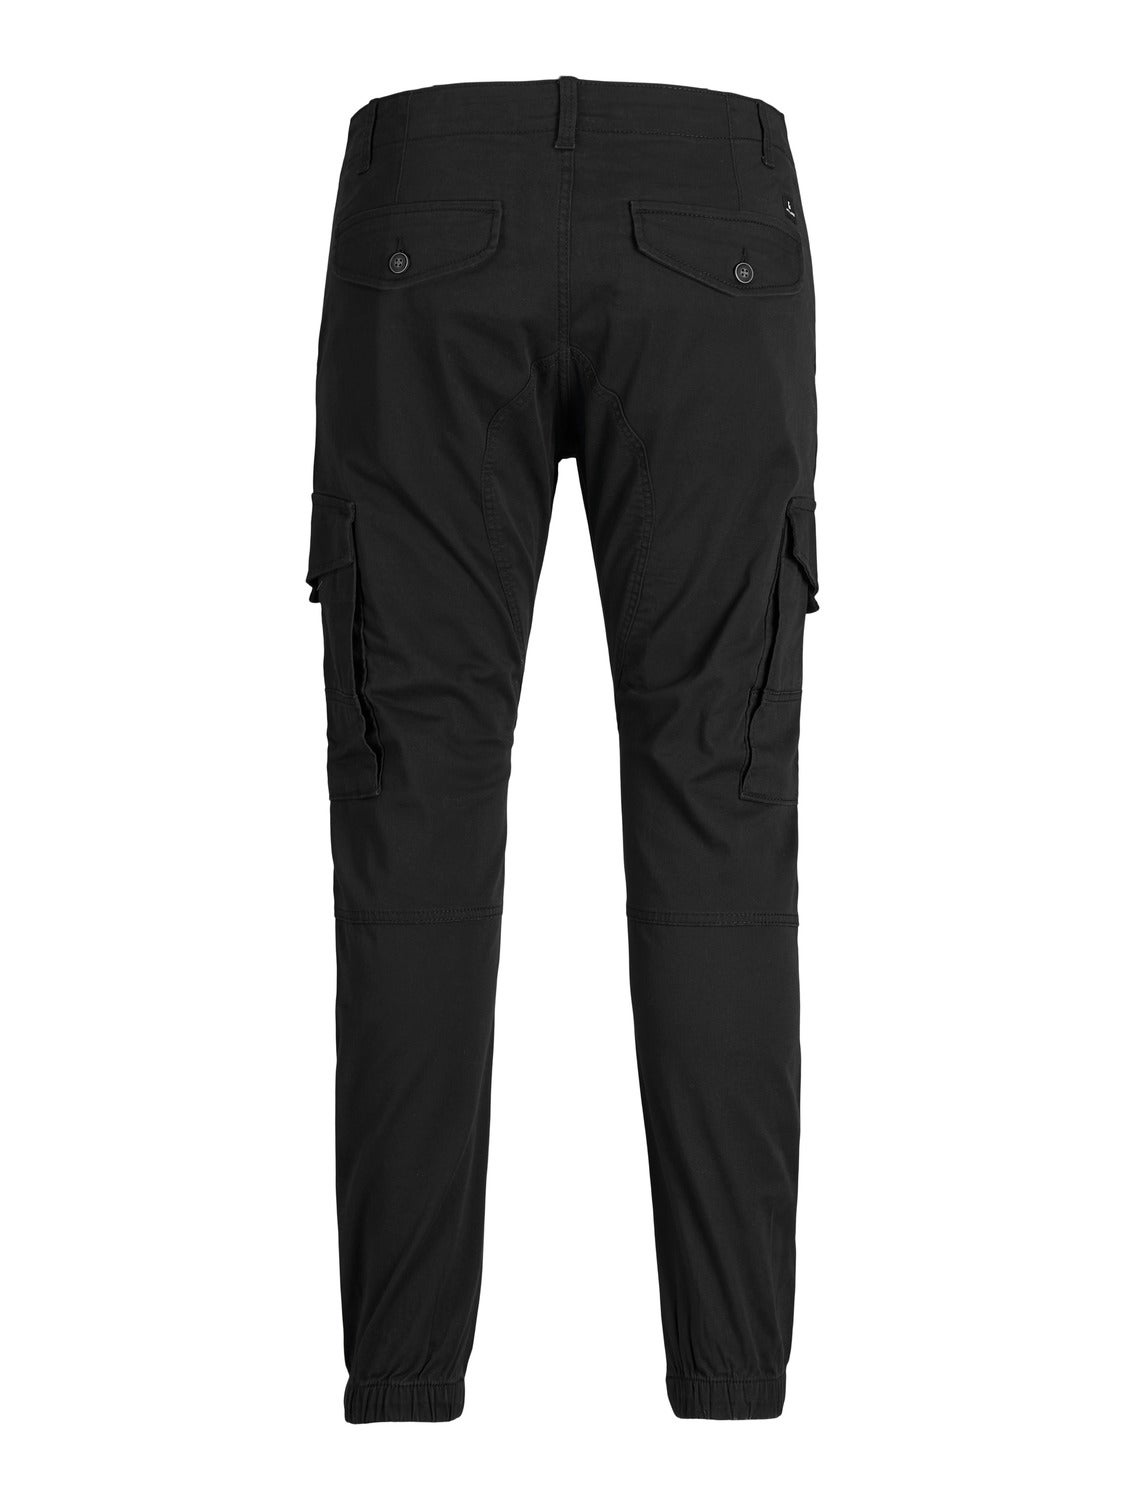 Black | Tapered Soft Jersey Trouser | WoolOvers UK